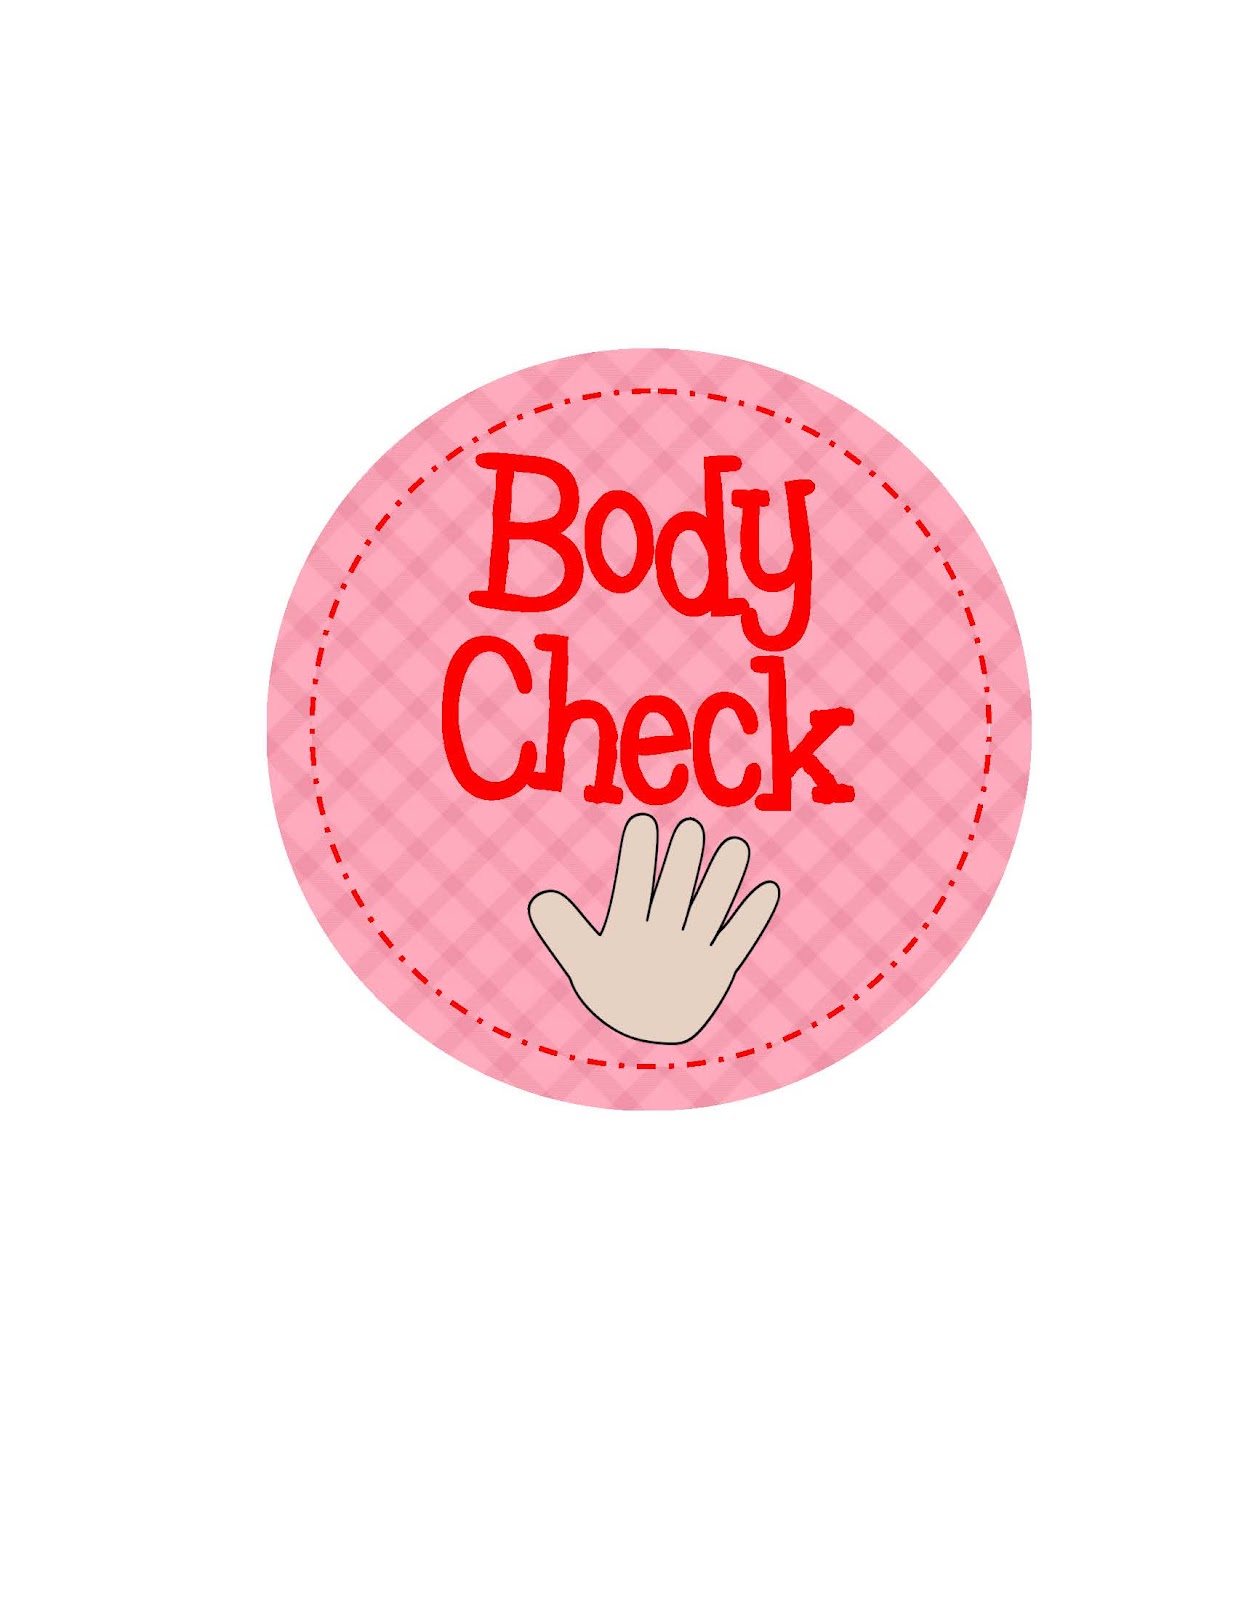 Totally Terrific in Texas: Sound Check & Body Check Charts